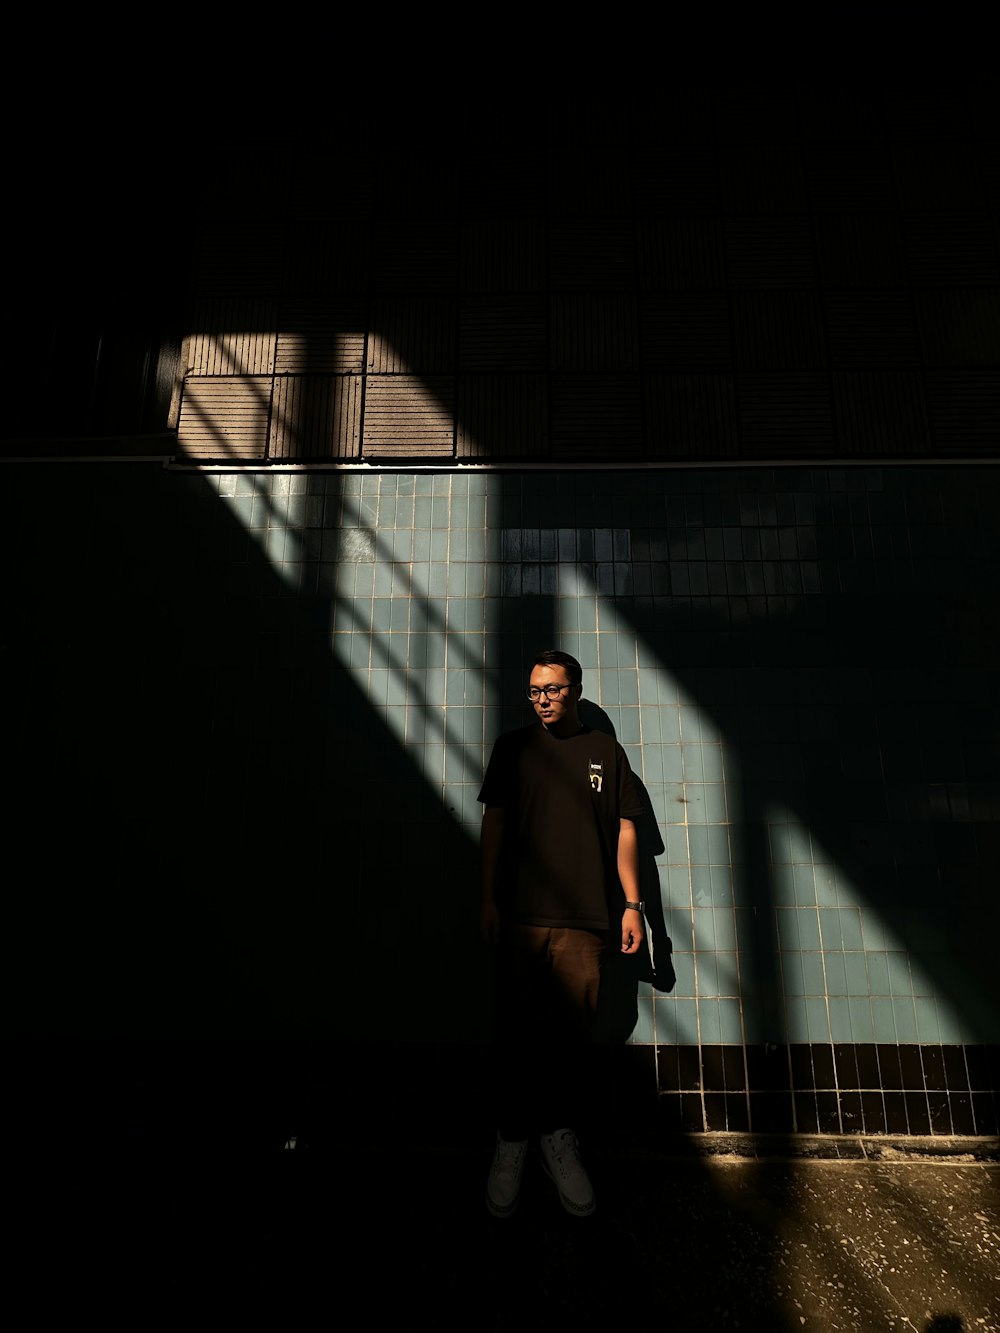 a man standing in the shadows of a building